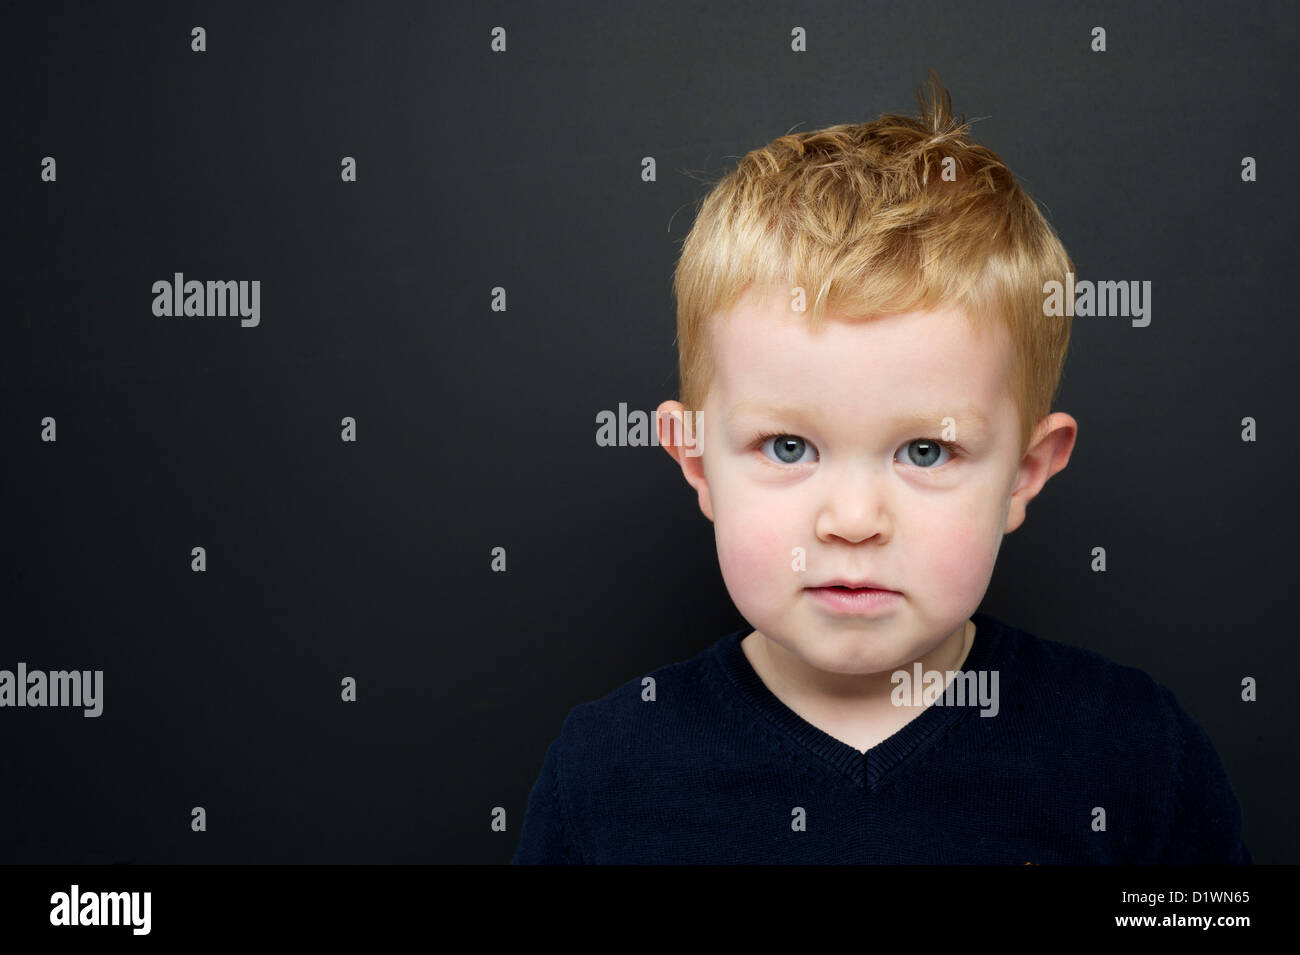 Smart young boy wearing a navy blue jumper stood in front of a blackboard Stock Photo